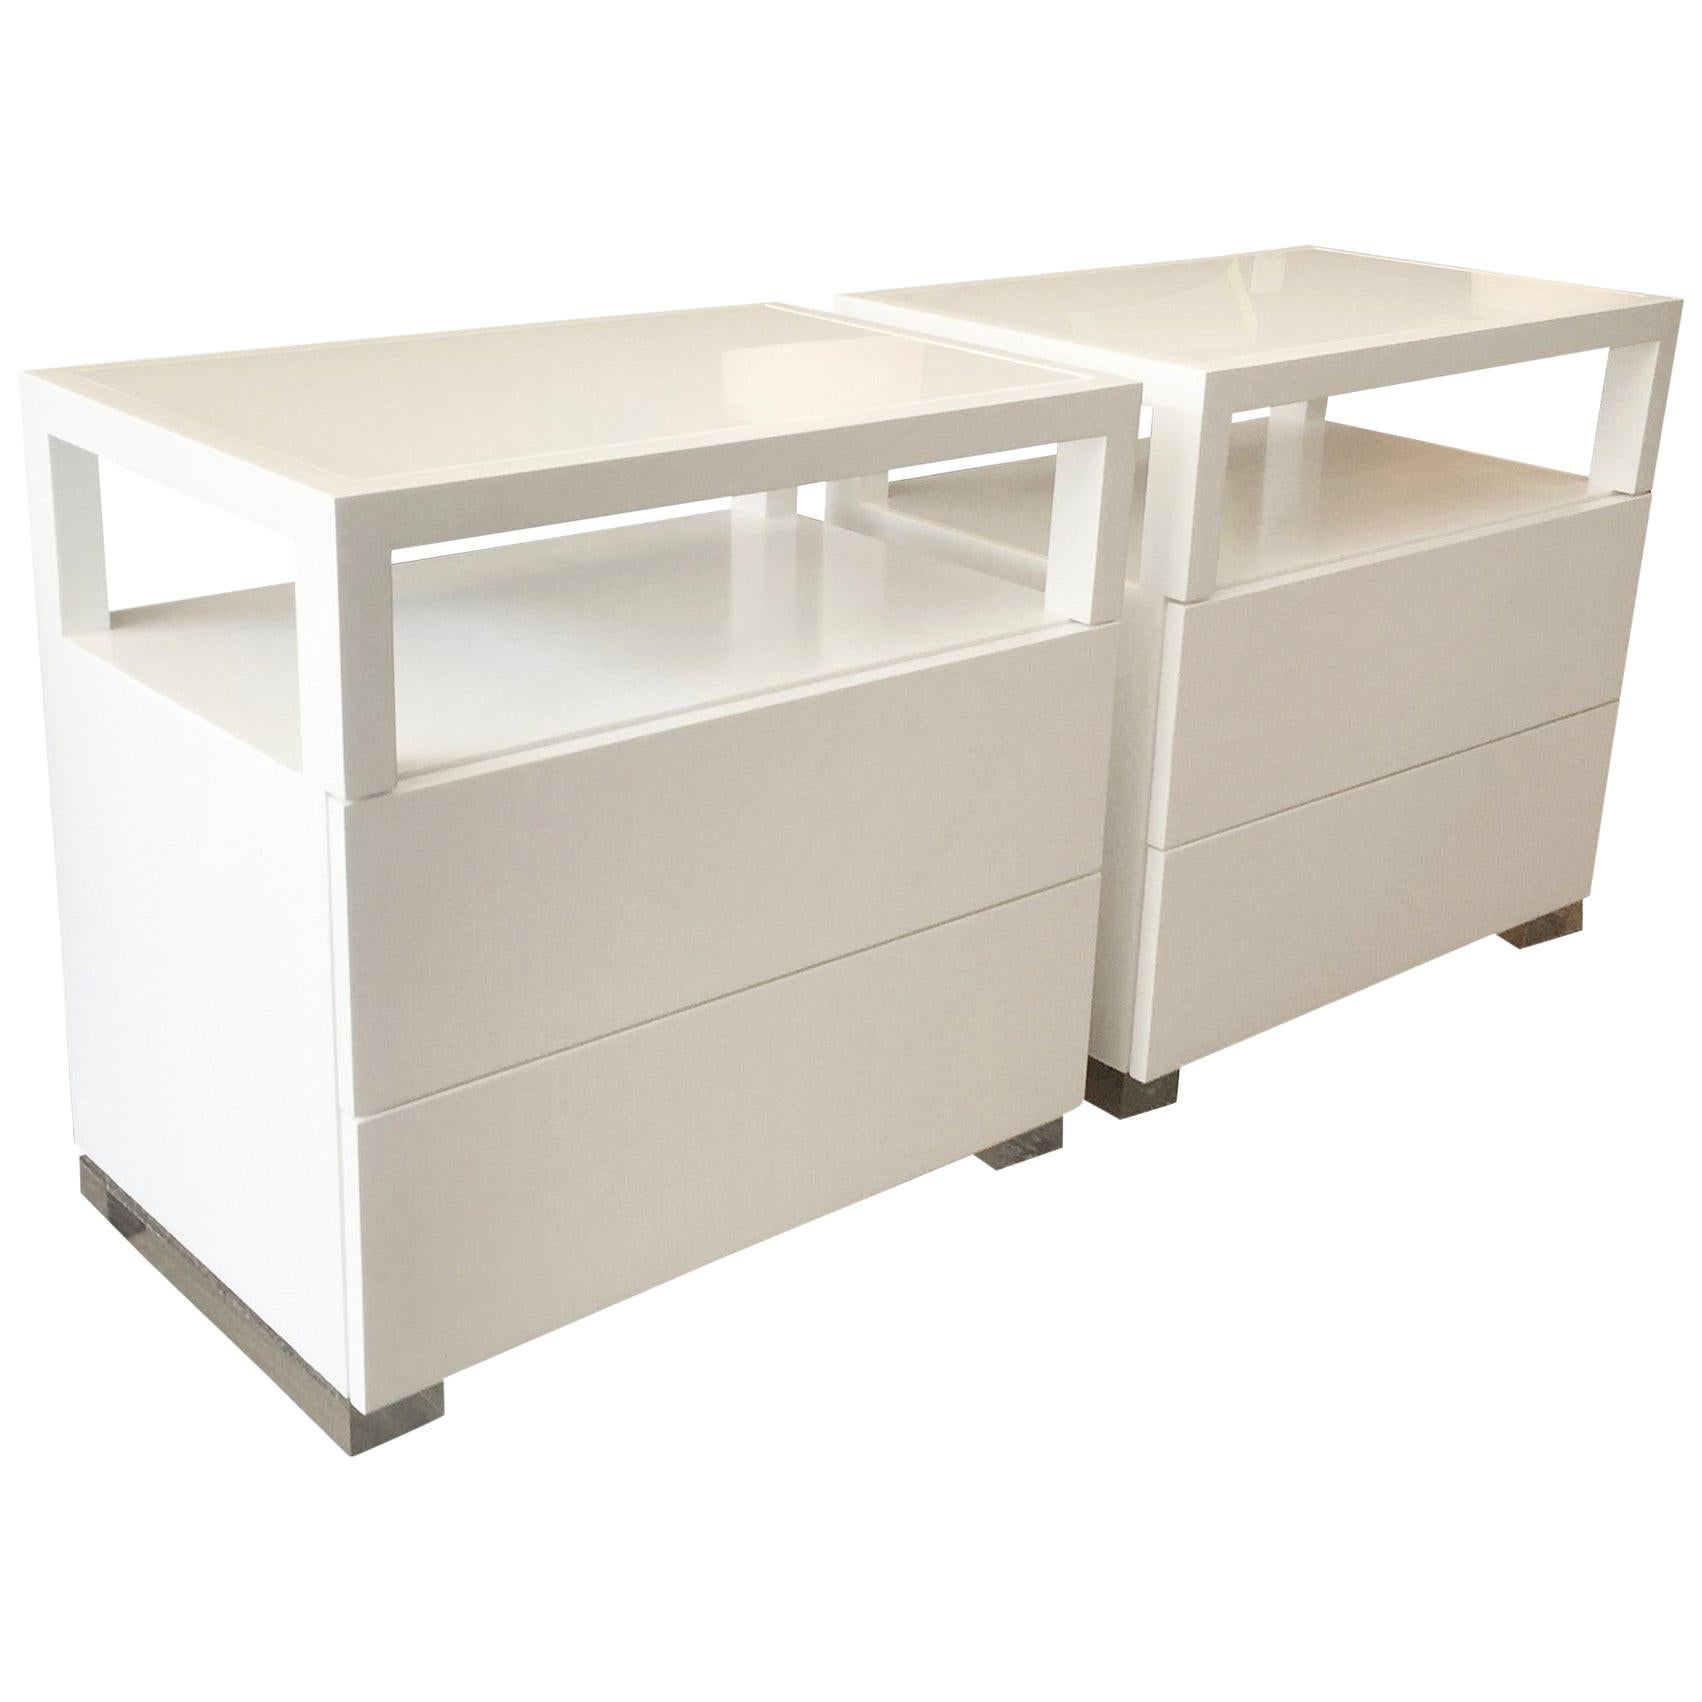 Pair of White Lacquer, Lucite and Glass Nightstands by Cain Modern